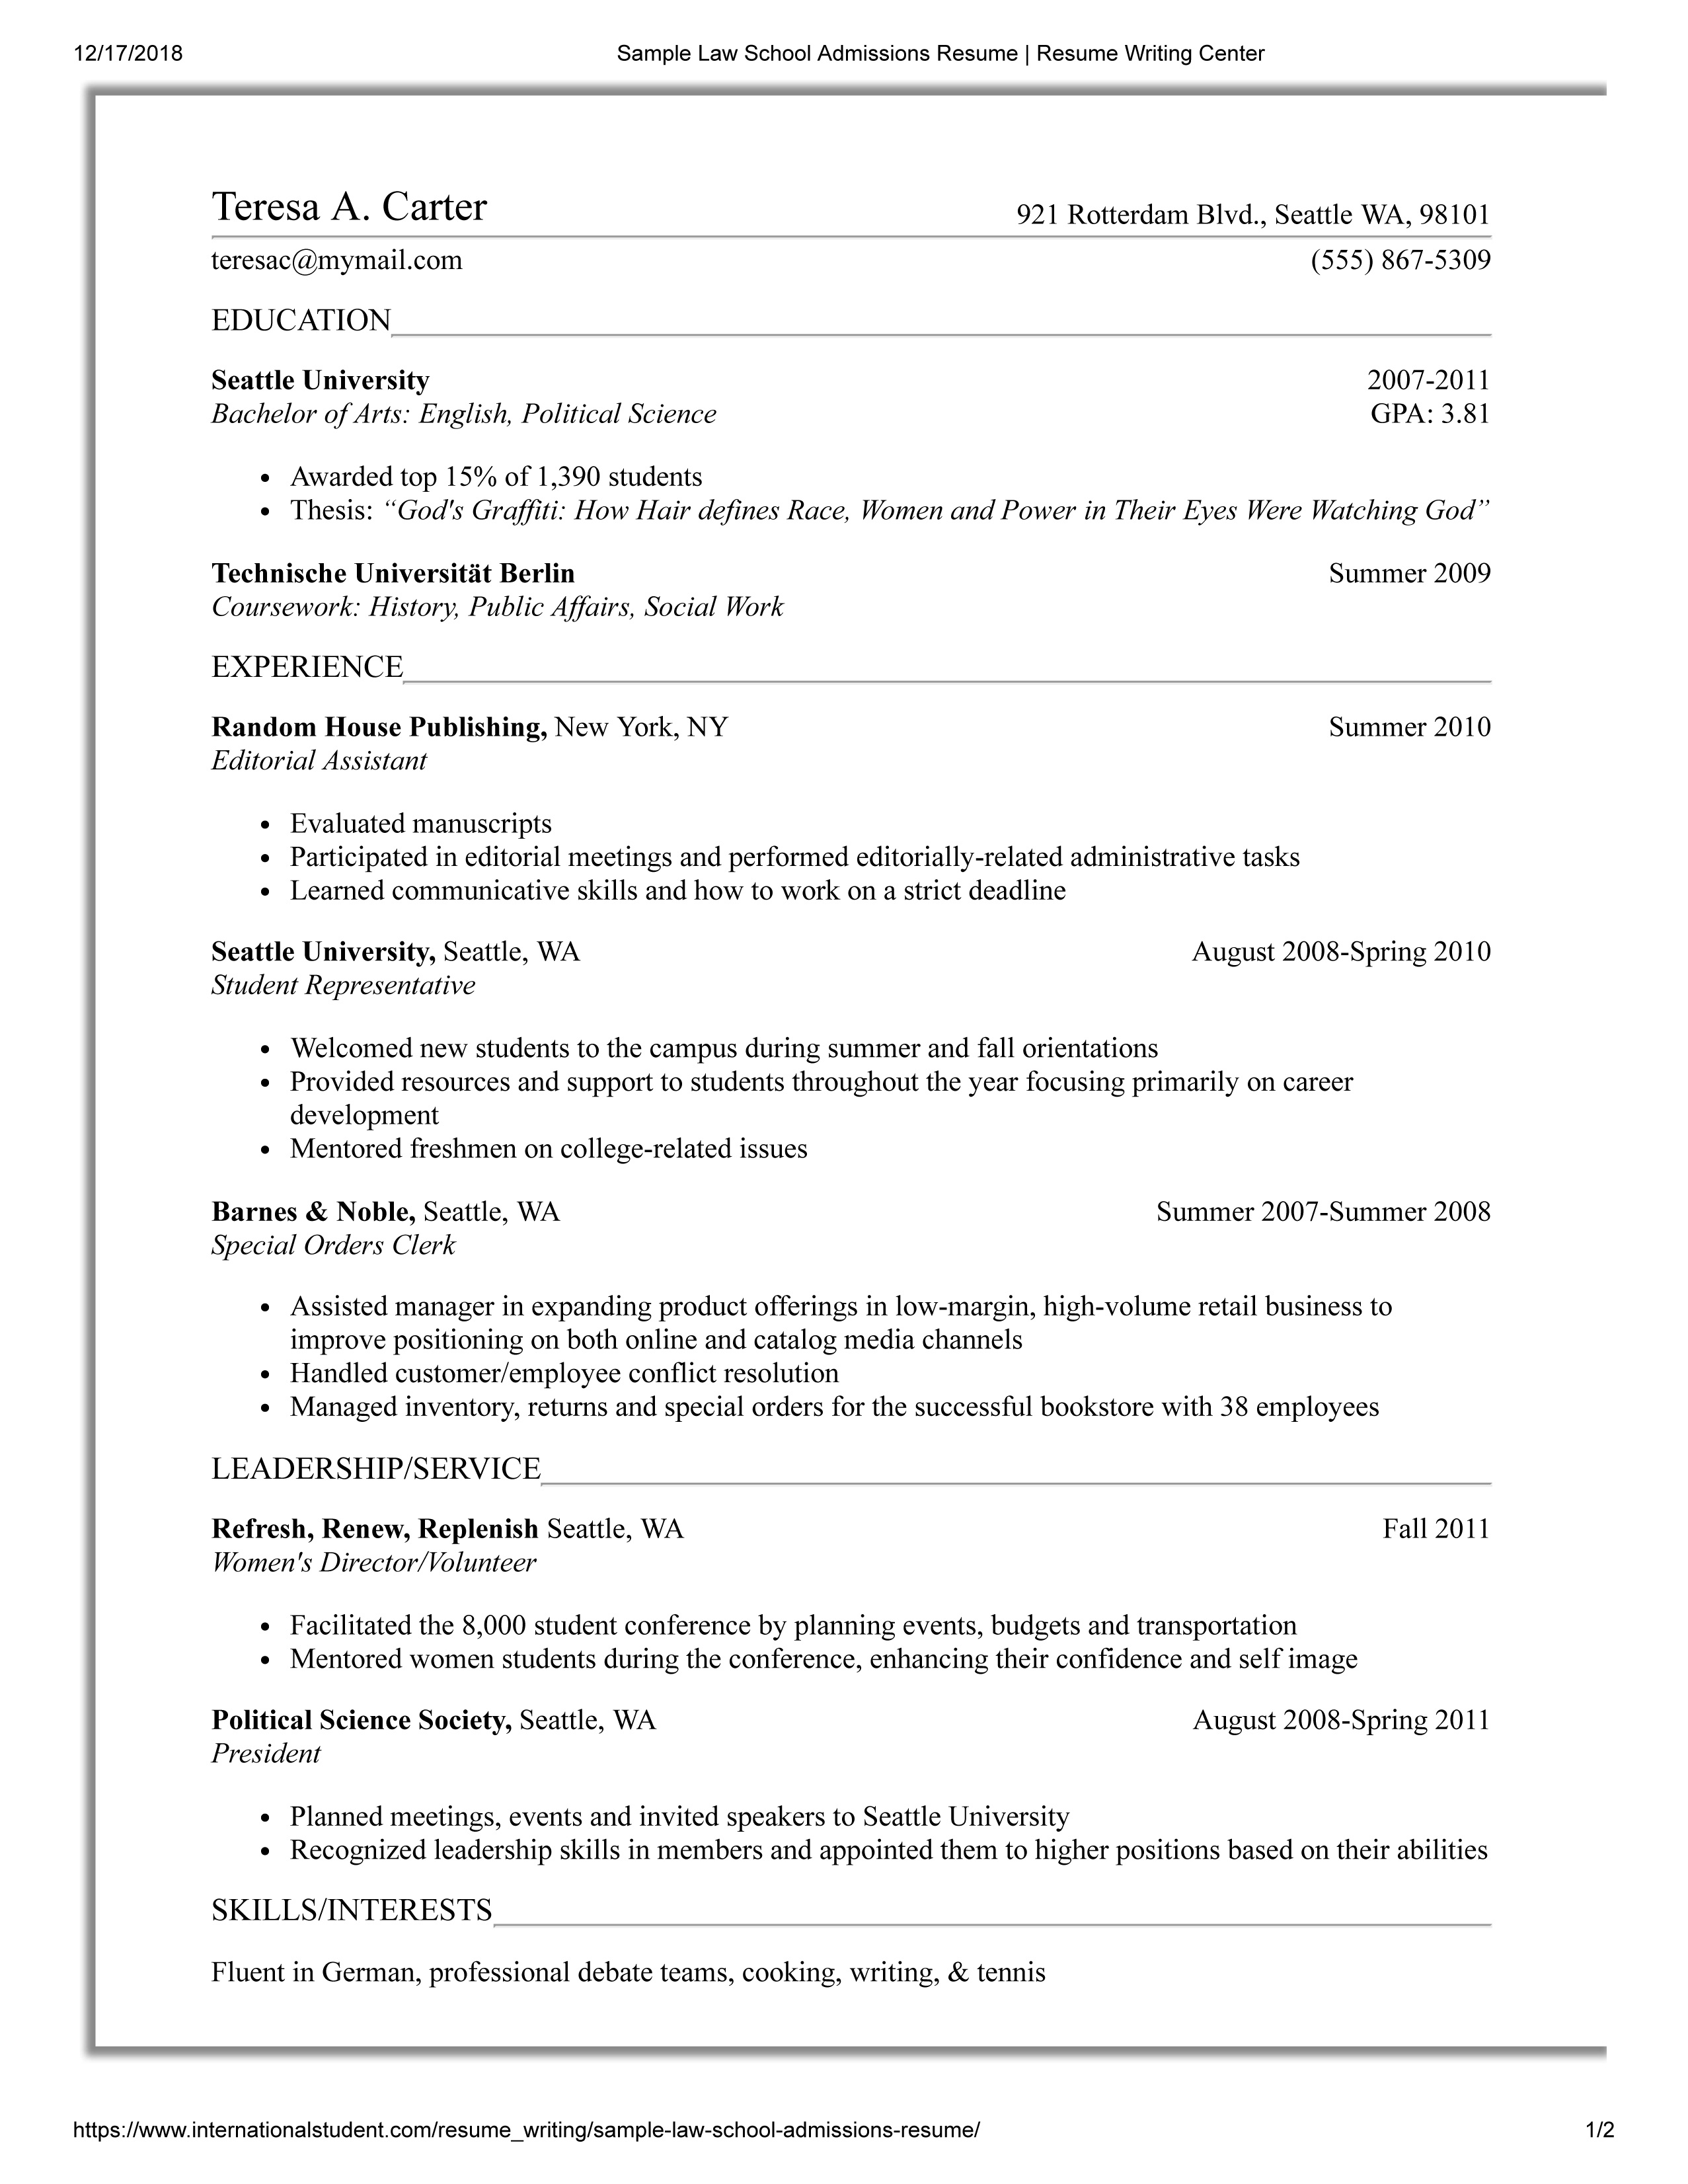 resume for lawyers sample   3